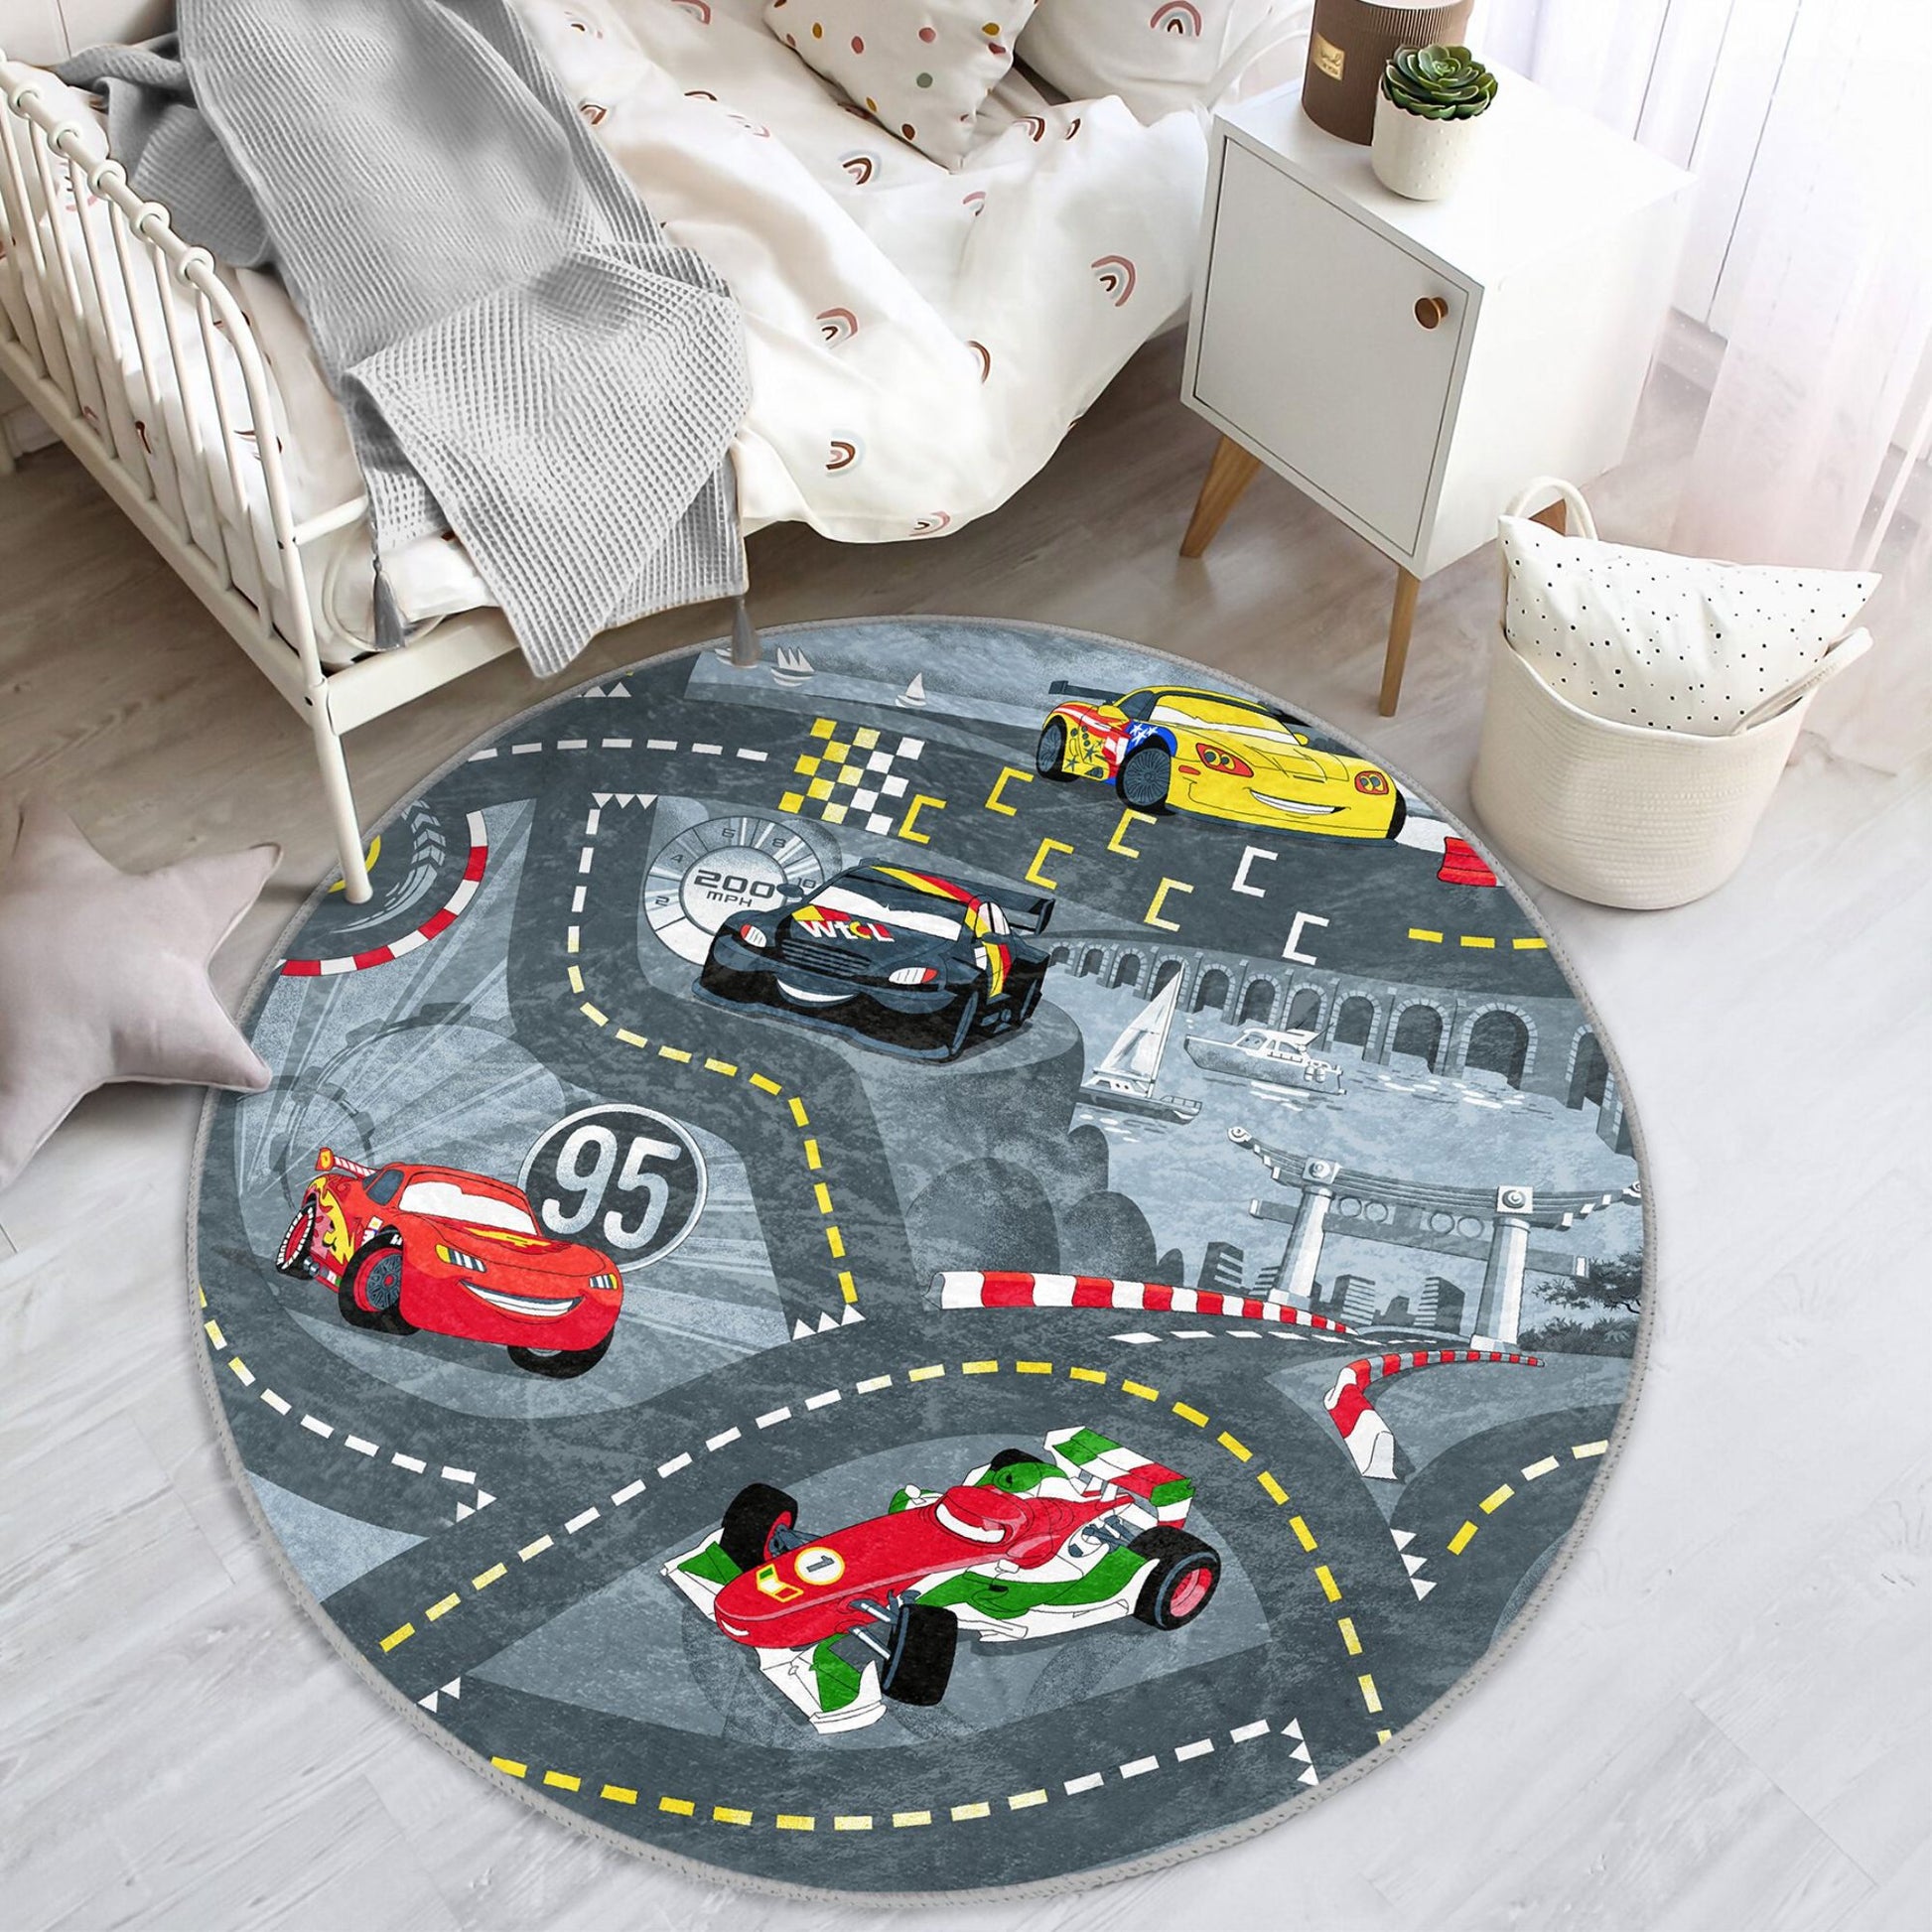 Educational Rug with Race Cars and Road Design